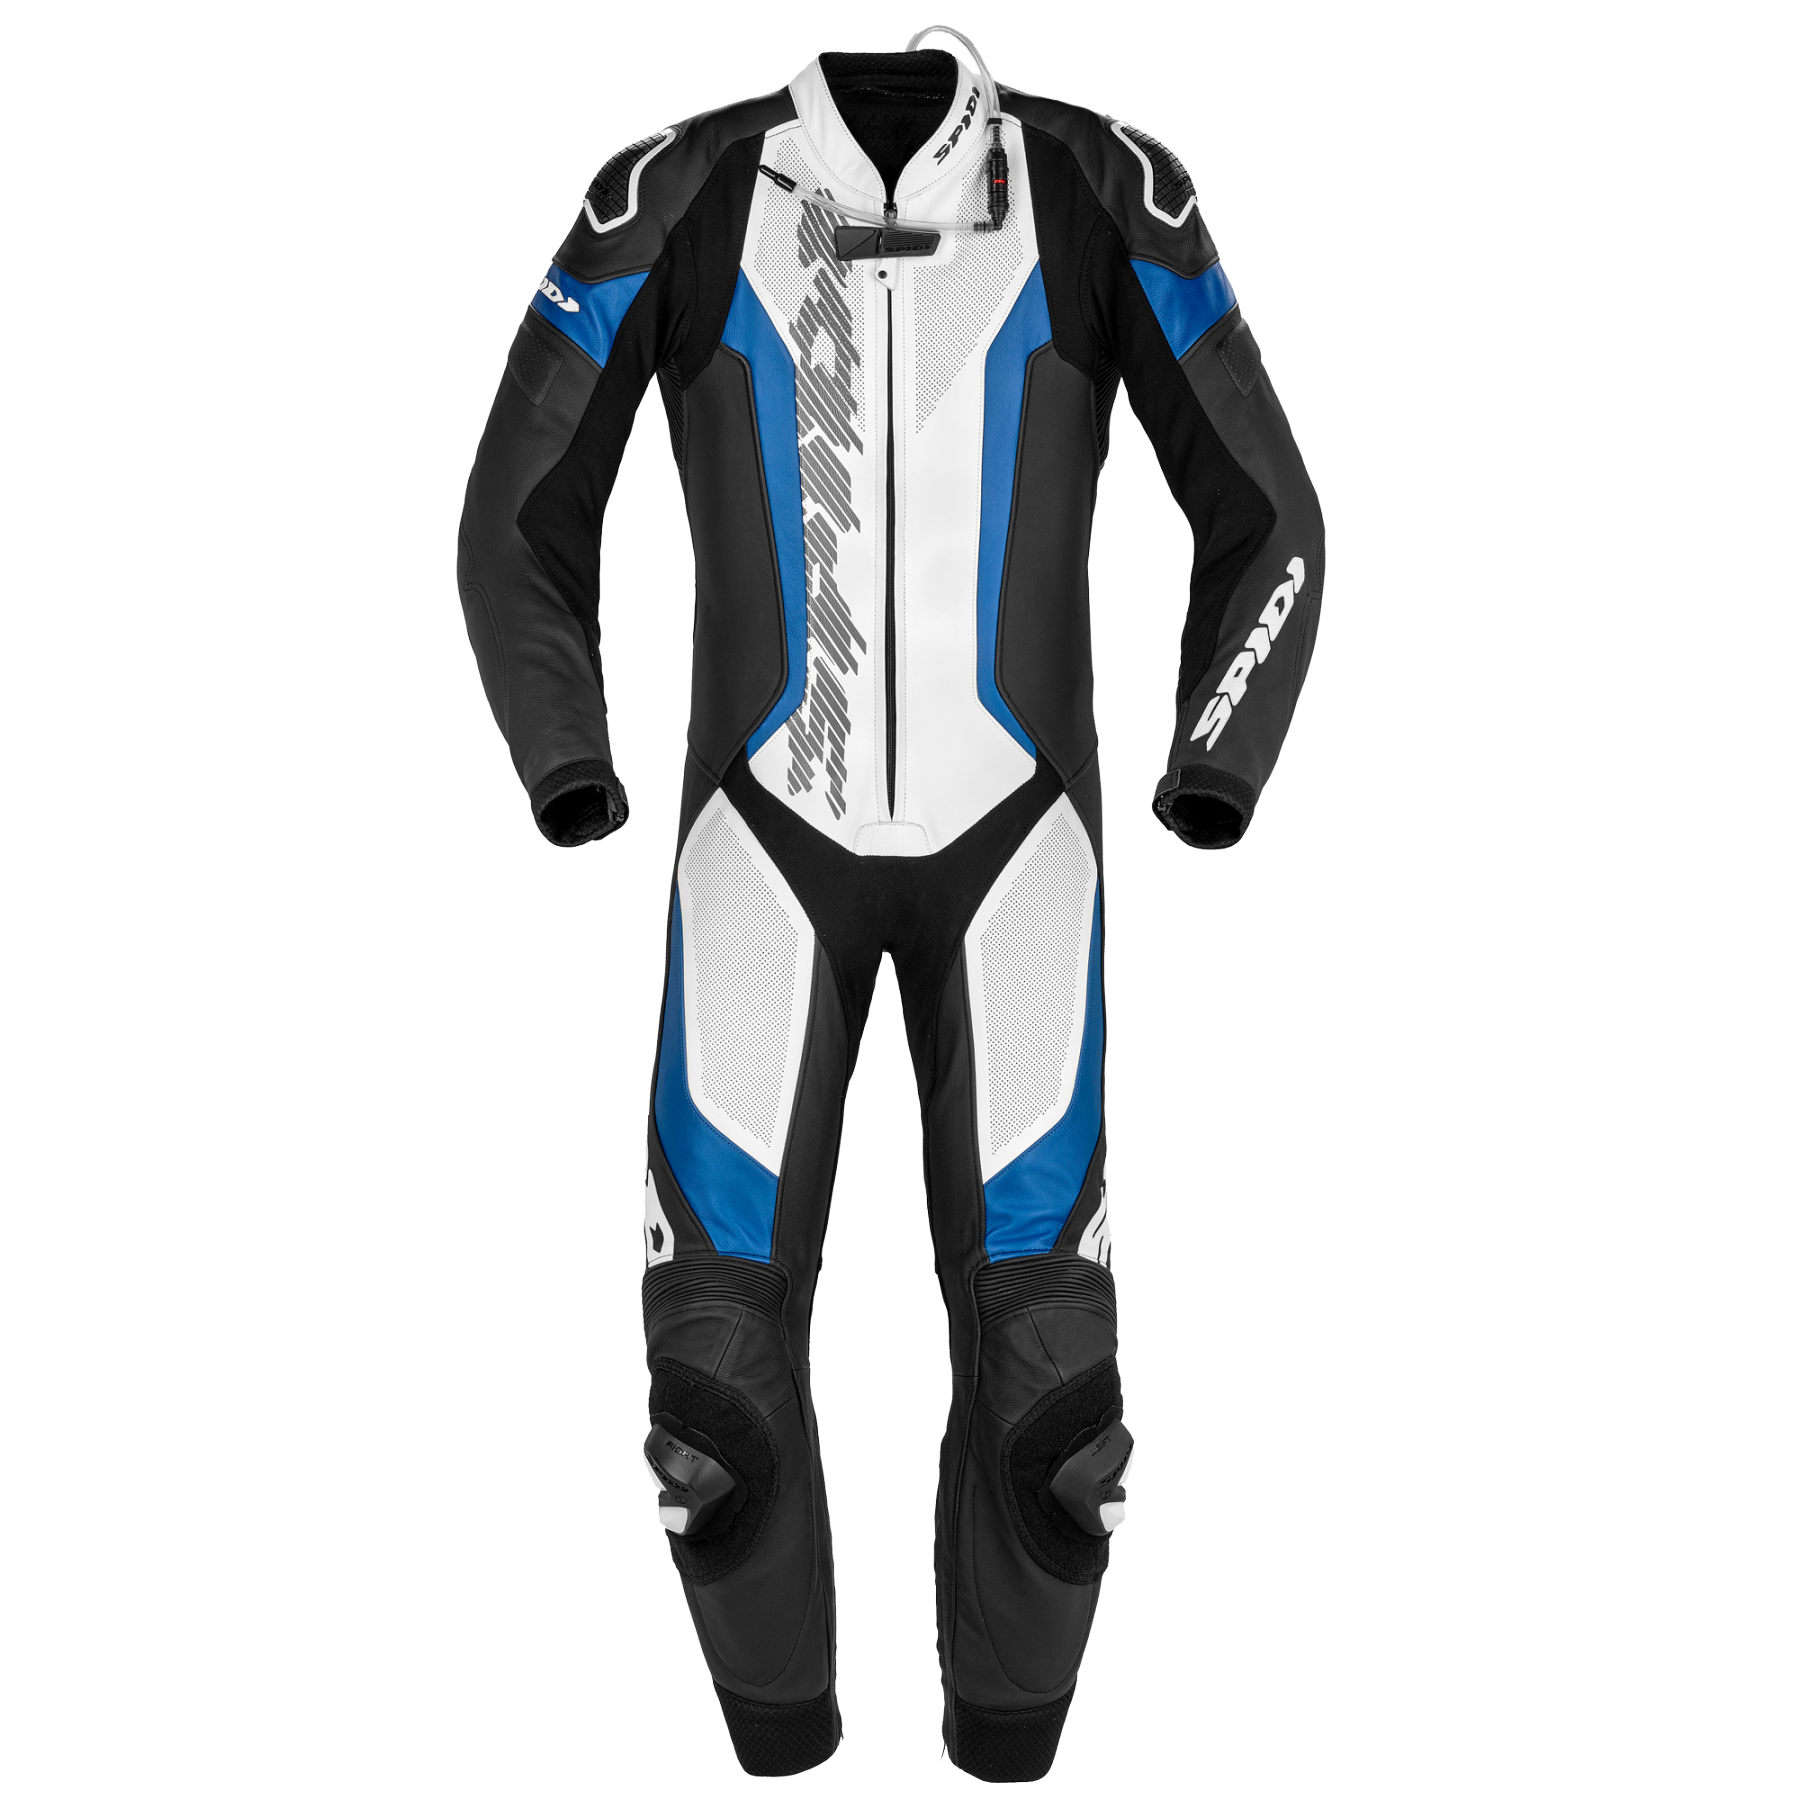 Image of Spidi Laser Pro Perforated Black Blue 1 Piece Racing Suit Size 48 ID 8030161359039